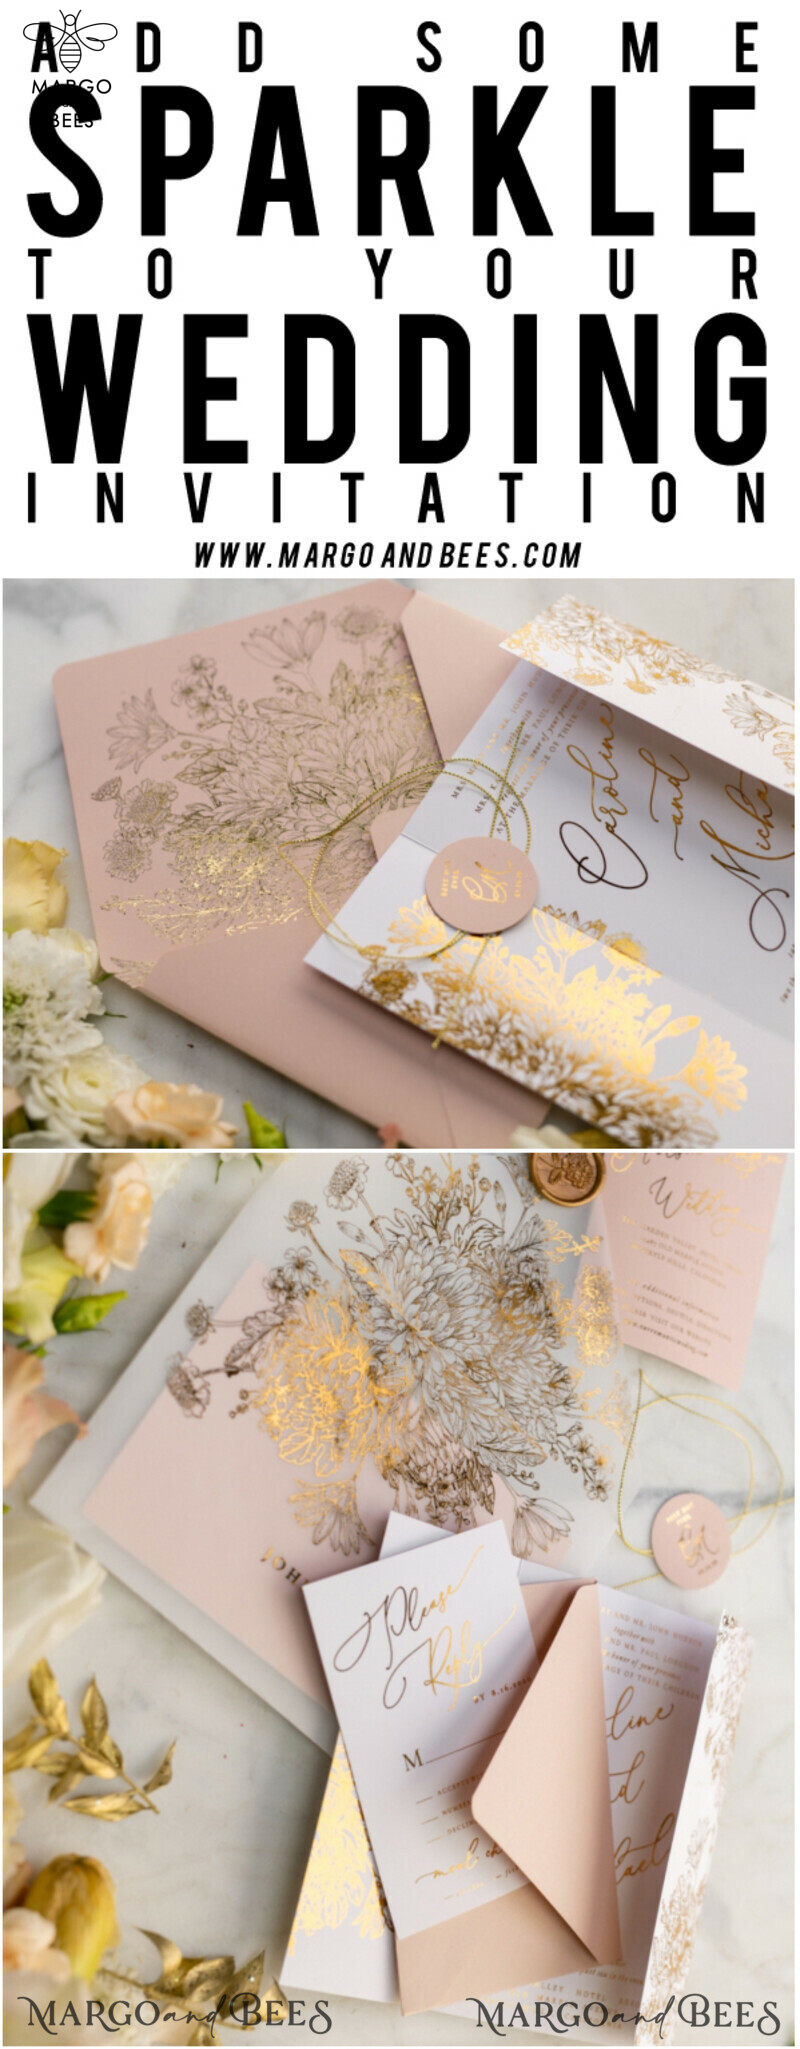 Exquisite Arabic Golden Wedding Invitations with Glamour Gold Foil and Romantic Blush Pink Touches: Bespoke Indian Wedding Stationery-41